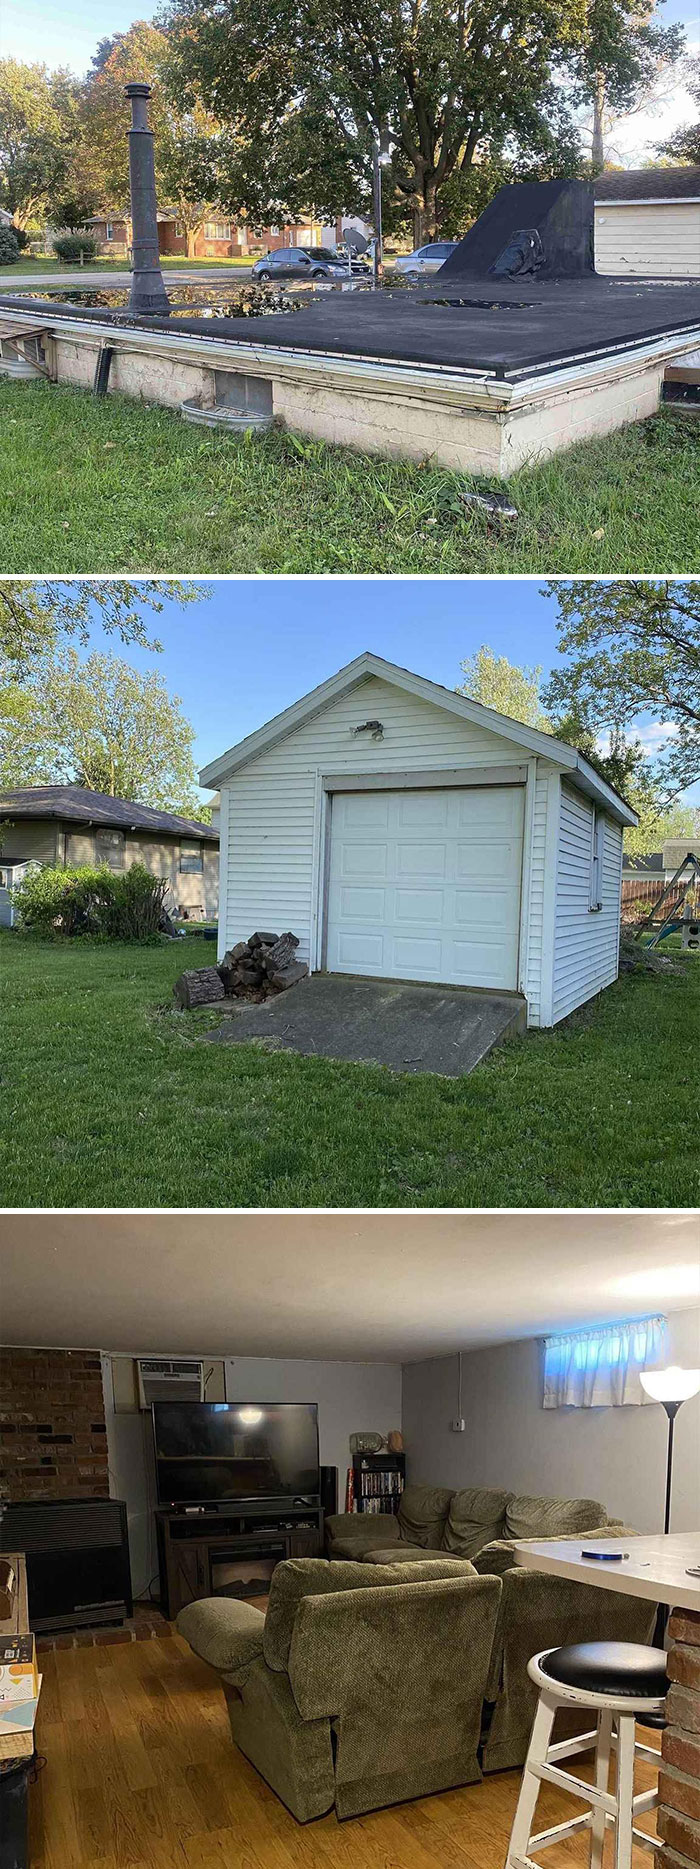 We Will Call This The Basement Home And It’s Amazinggggg. Currently Listed For Only $35k In Deer Creek, Il. 2 Bd, 1 Ba. 832 Sq Ft. .45 Acre Lot